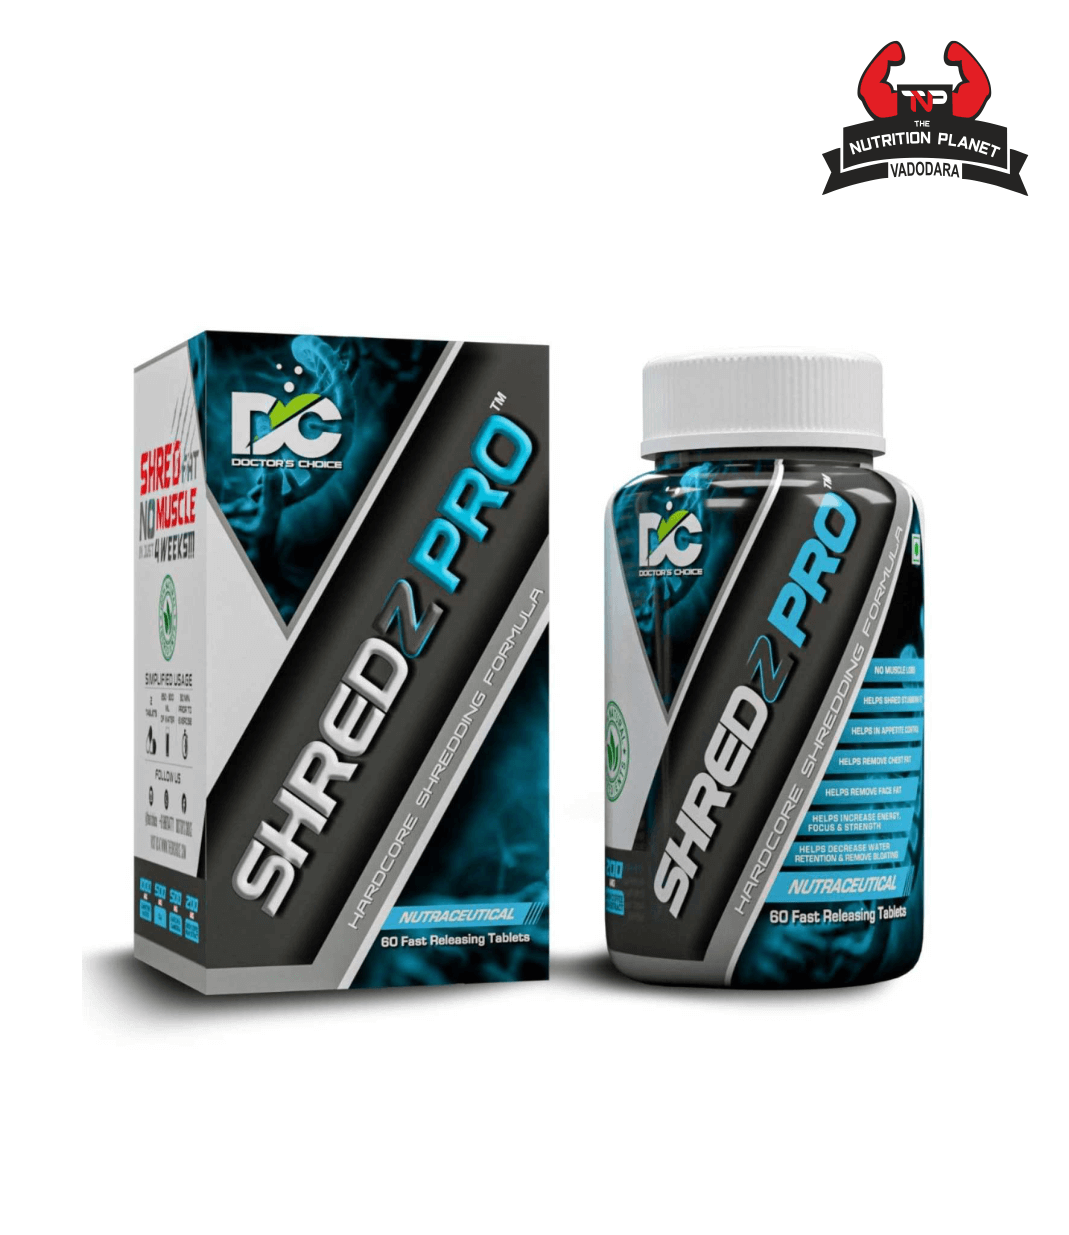 Doctor's Choice SHREDZ PRO Formula with 500mg Acetyl-L-Carnitine, CLA, Green Coffee Bean Extract, Garcinia Cambogia, 60 count 